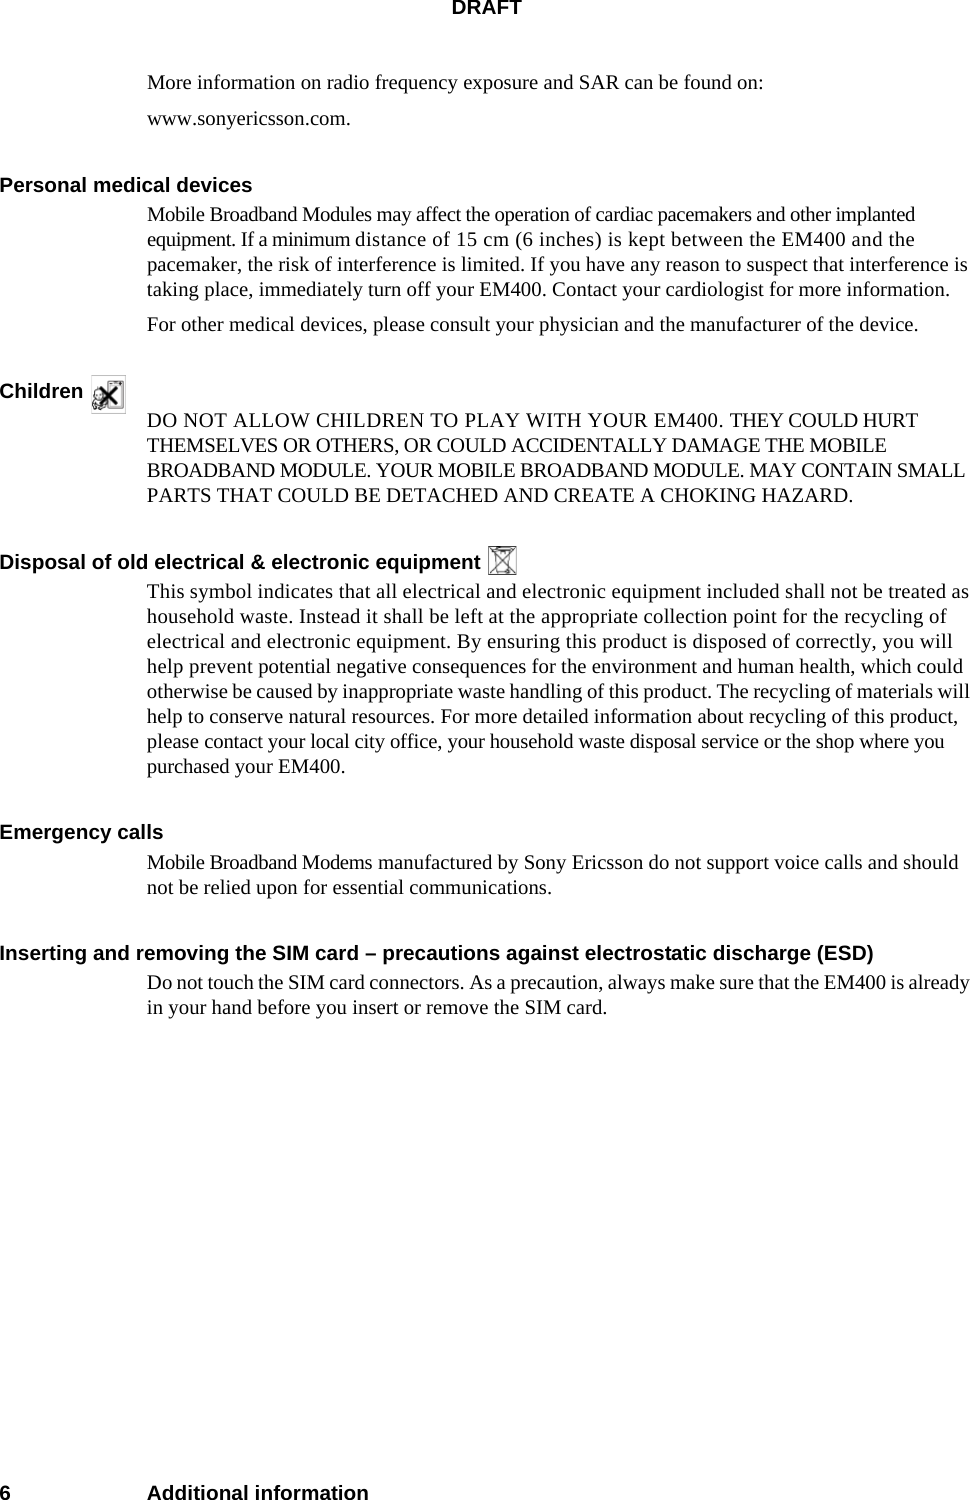 DRAFT6 Additional informationMore information on radio frequency exposure and SAR can be found on:www.sonyericsson.com.Personal medical devicesMobile Broadband Modules may affect the operation of cardiac pacemakers and other implanted equipment. If a minimum distance of 15 cm (6 inches) is kept between the EM400 and the pacemaker, the risk of interference is limited. If you have any reason to suspect that interference is taking place, immediately turn off your EM400. Contact your cardiologist for more information. For other medical devices, please consult your physician and the manufacturer of the device.Children DO NOT ALLOW CHILDREN TO PLAY WITH YOUR EM400. THEY COULD HURT THEMSELVES OR OTHERS, OR COULD ACCIDENTALLY DAMAGE THE MOBILE BROADBAND MODULE. YOUR MOBILE BROADBAND MODULE. MAY CONTAIN SMALL PARTS THAT COULD BE DETACHED AND CREATE A CHOKING HAZARD.Disposal of old electrical &amp; electronic equipment This symbol indicates that all electrical and electronic equipment included shall not be treated as household waste. Instead it shall be left at the appropriate collection point for the recycling of electrical and electronic equipment. By ensuring this product is disposed of correctly, you will help prevent potential negative consequences for the environment and human health, which could otherwise be caused by inappropriate waste handling of this product. The recycling of materials will help to conserve natural resources. For more detailed information about recycling of this product, please contact your local city office, your household waste disposal service or the shop where you purchased your EM400.Emergency callsMobile Broadband Modems manufactured by Sony Ericsson do not support voice calls and should not be relied upon for essential communications.Inserting and removing the SIM card – precautions against electrostatic discharge (ESD)Do not touch the SIM card connectors. As a precaution, always make sure that the EM400 is already in your hand before you insert or remove the SIM card.